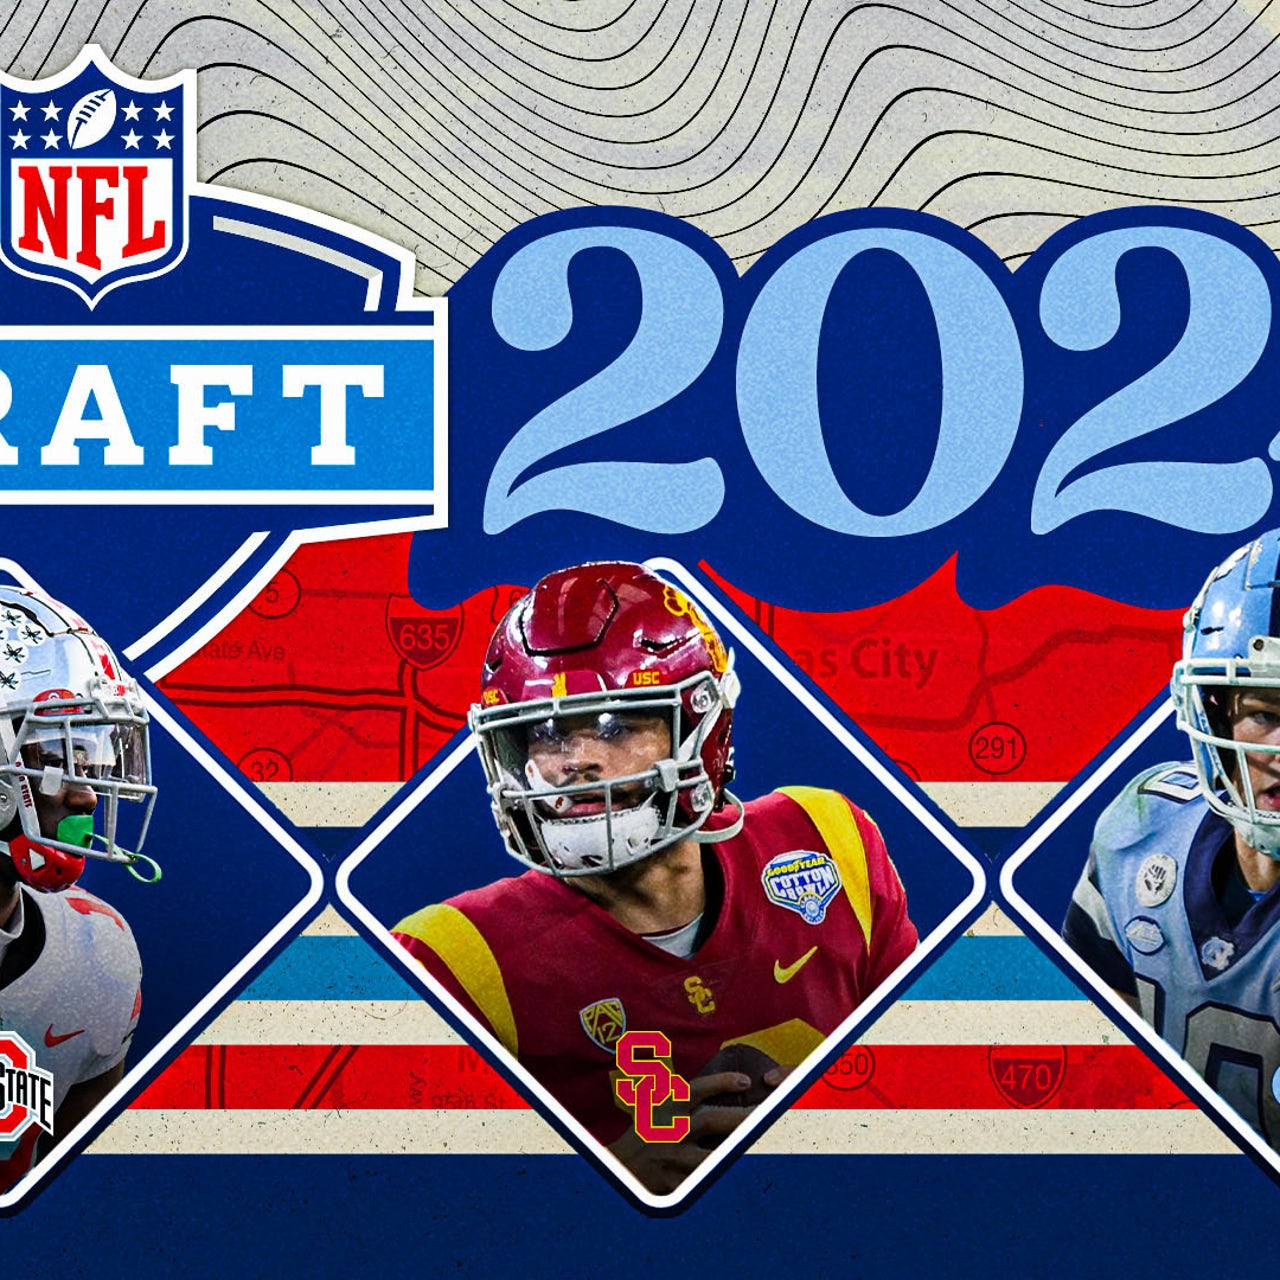 Draft watch: Giants fall to No. 6 in 2024 NFL Draft after beating Patriots  - Big Blue View